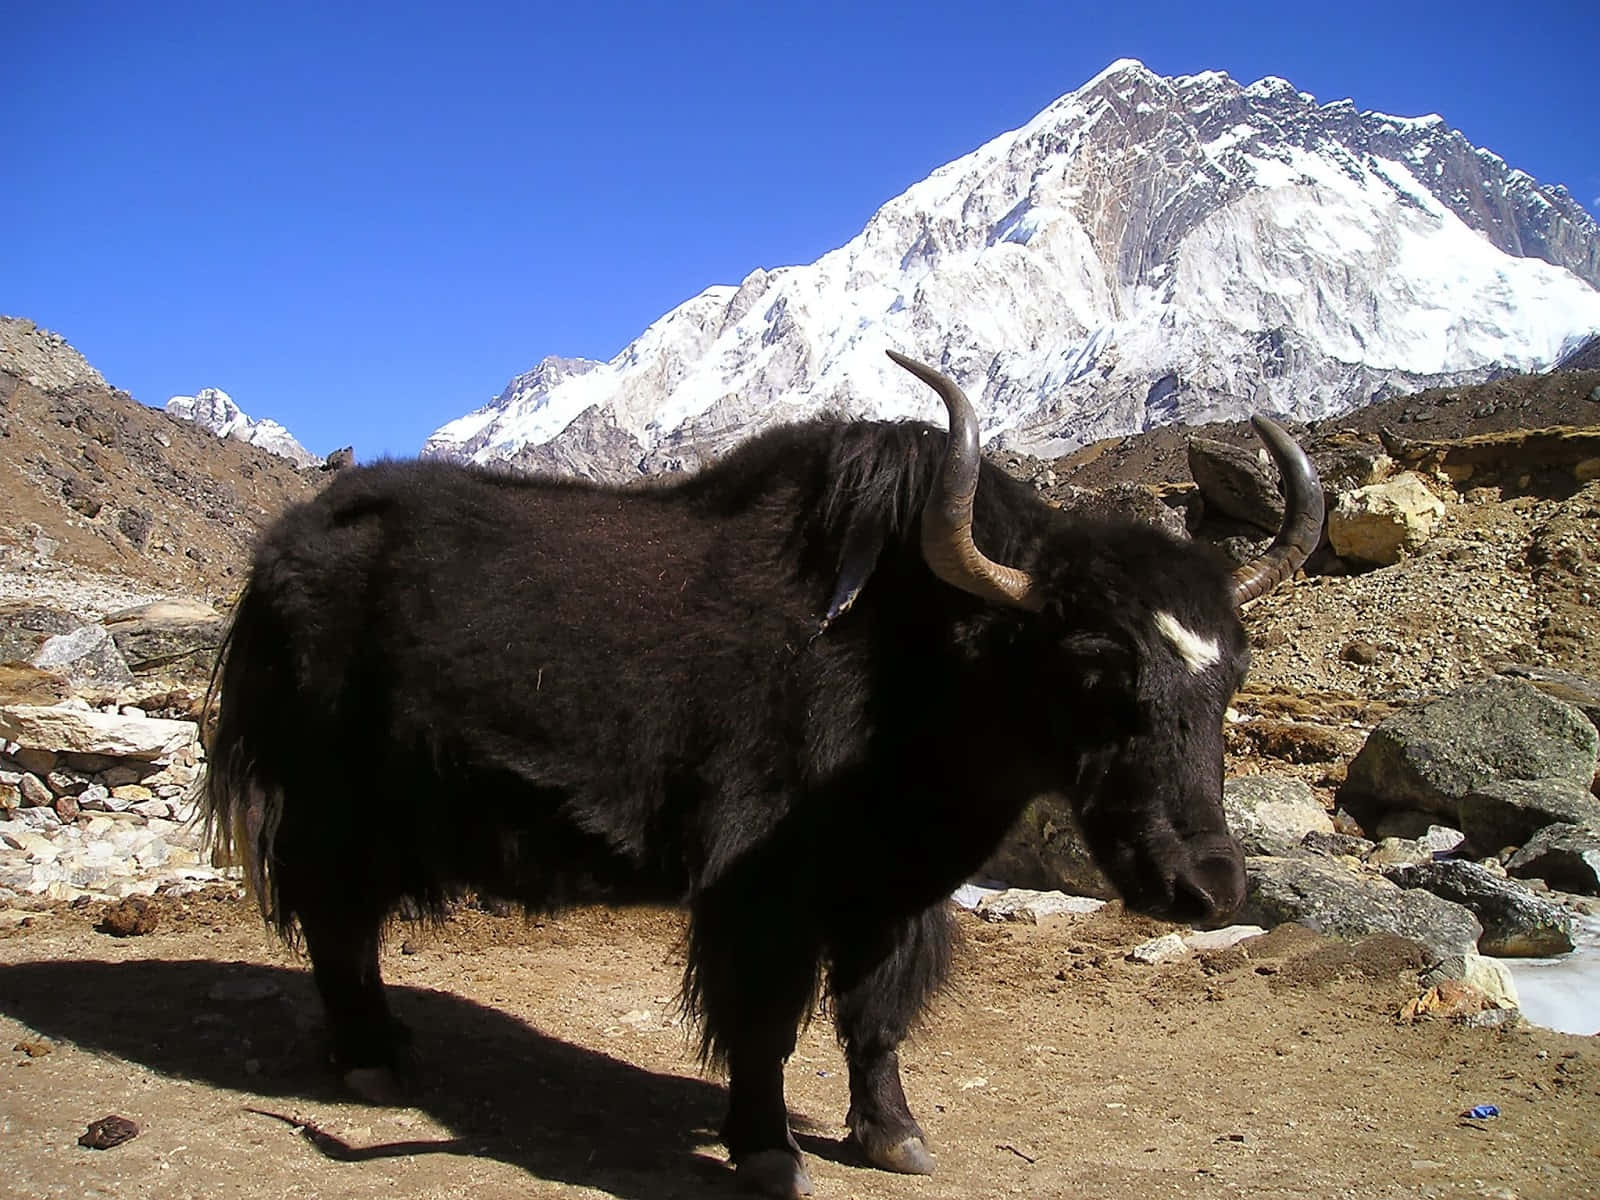 A brief encounter with a Yak